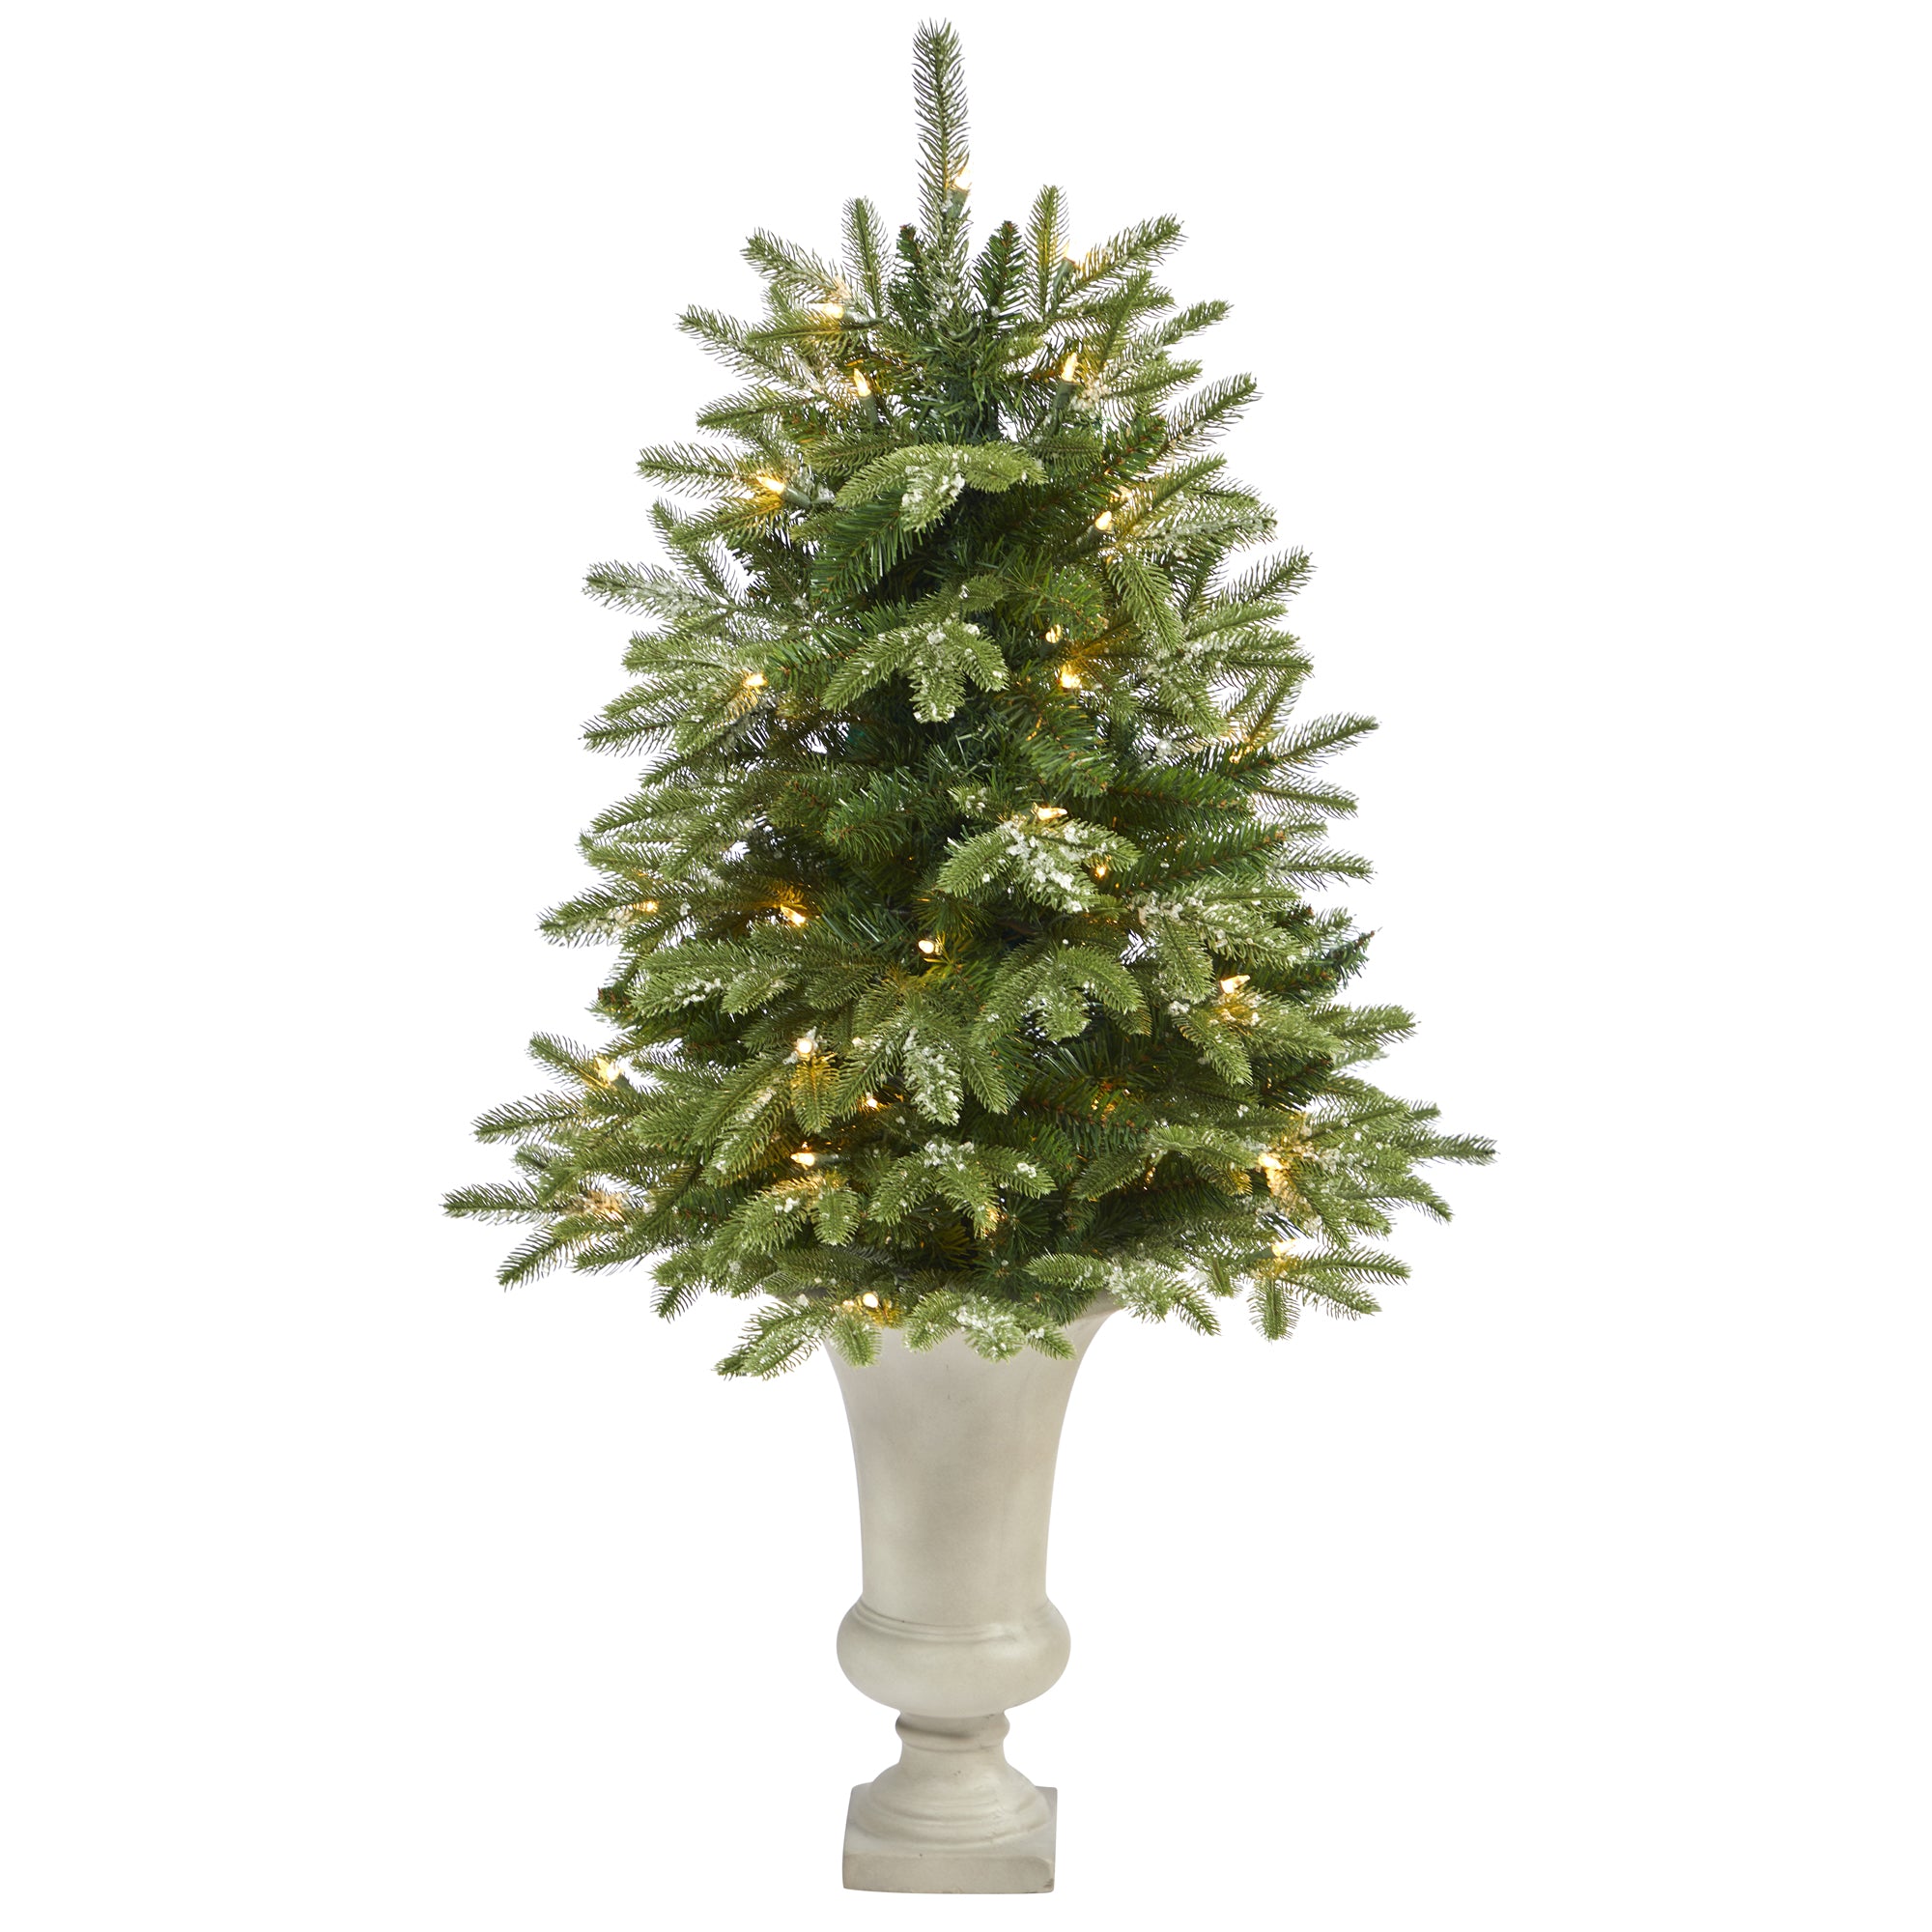 44"� Snowed Grand Teton Fir Artificial Christmas Tree with 50 Clear Lights and 111 Bendable Branches in Sand Colored Urn